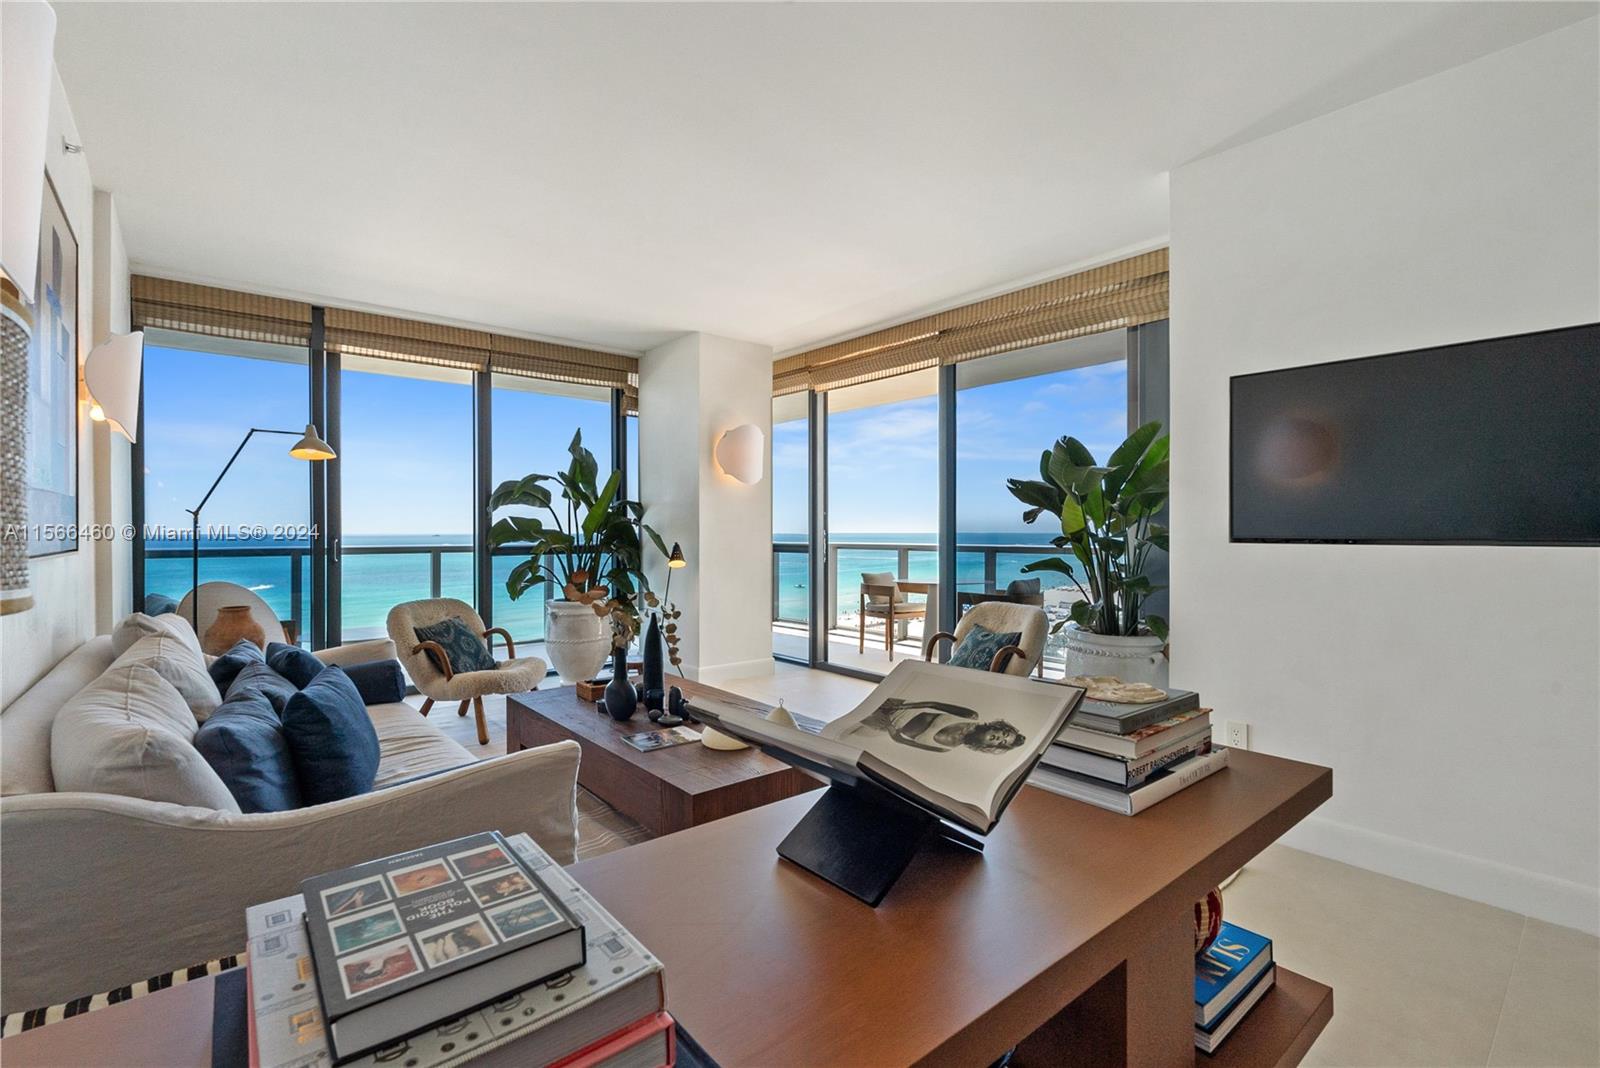 Listing Image 2201 Collins Ave #1228